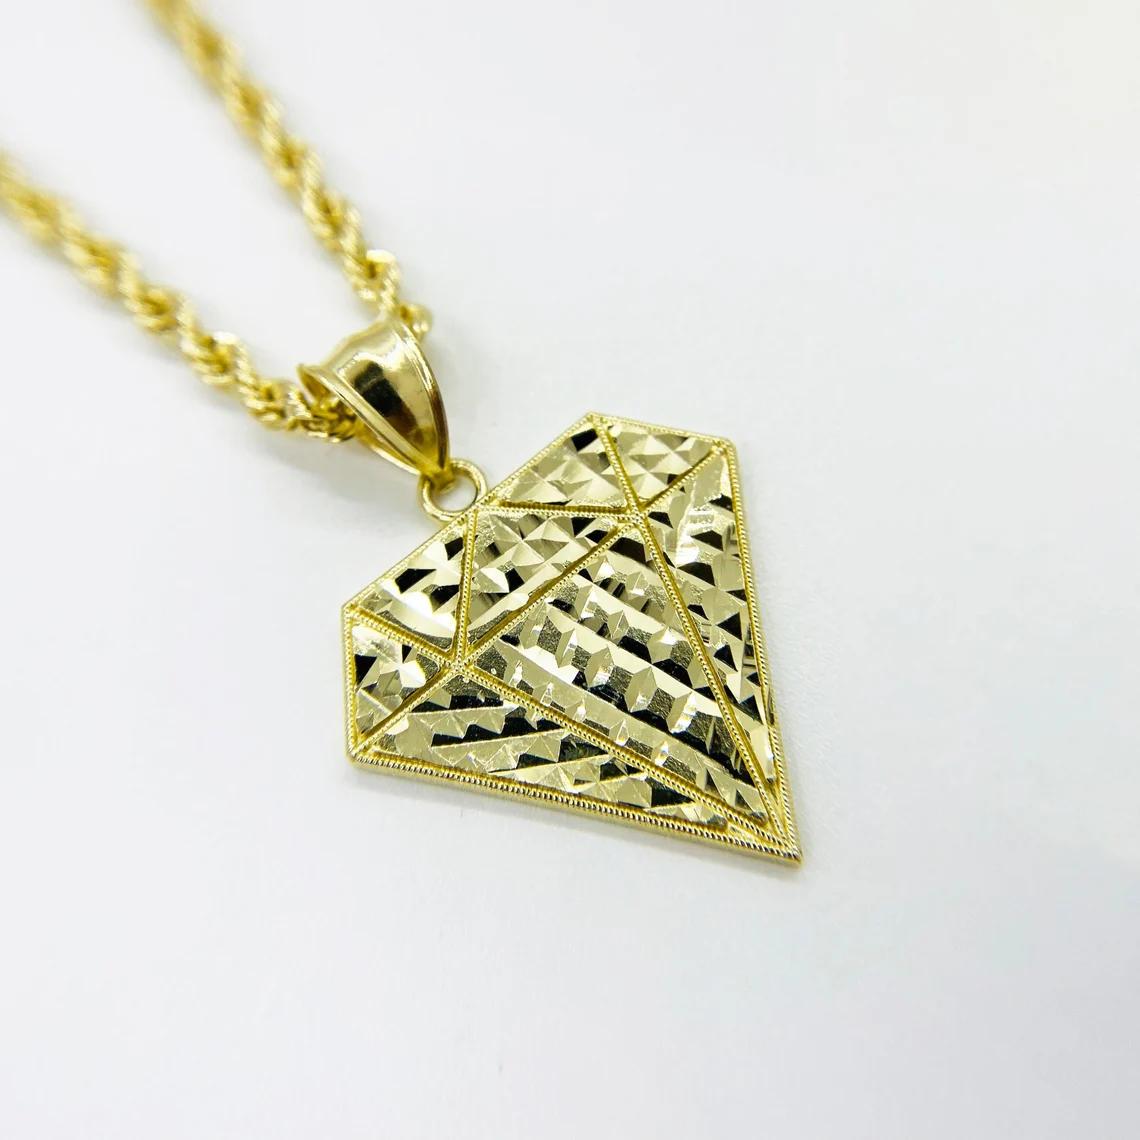 Gold Plated Nugget Diamond Shaped Pendant Charm Necklace